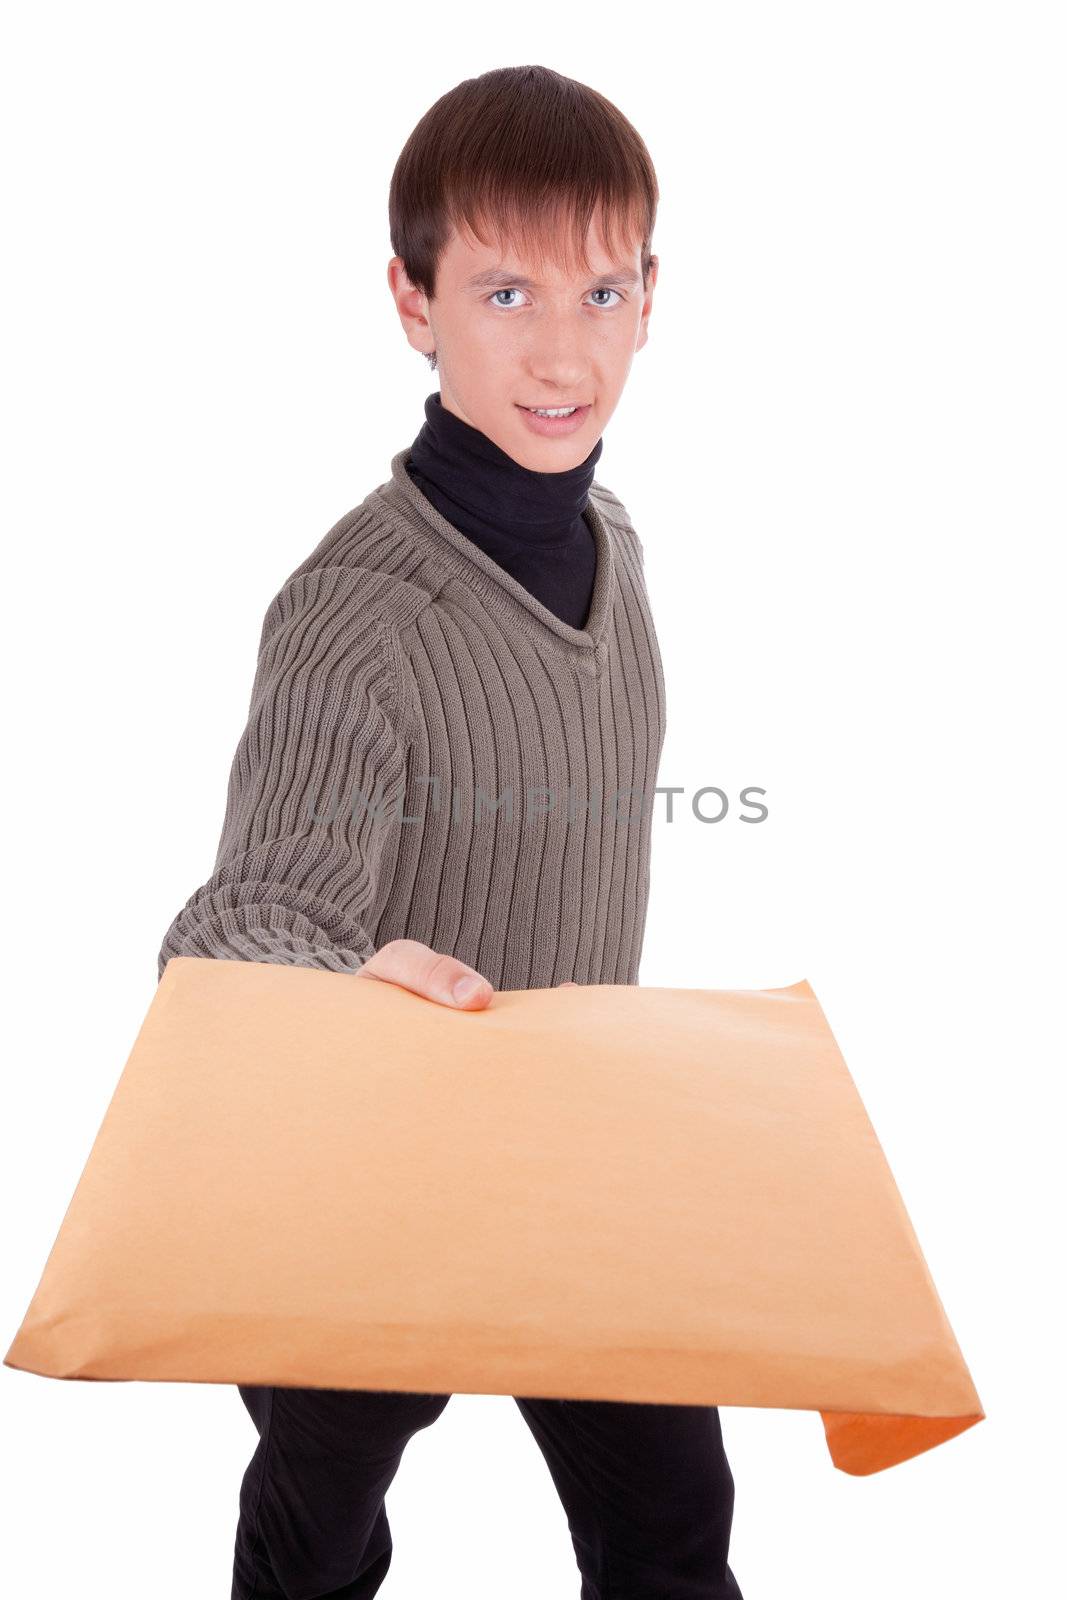 teenager - courier with a package (letter)  on white